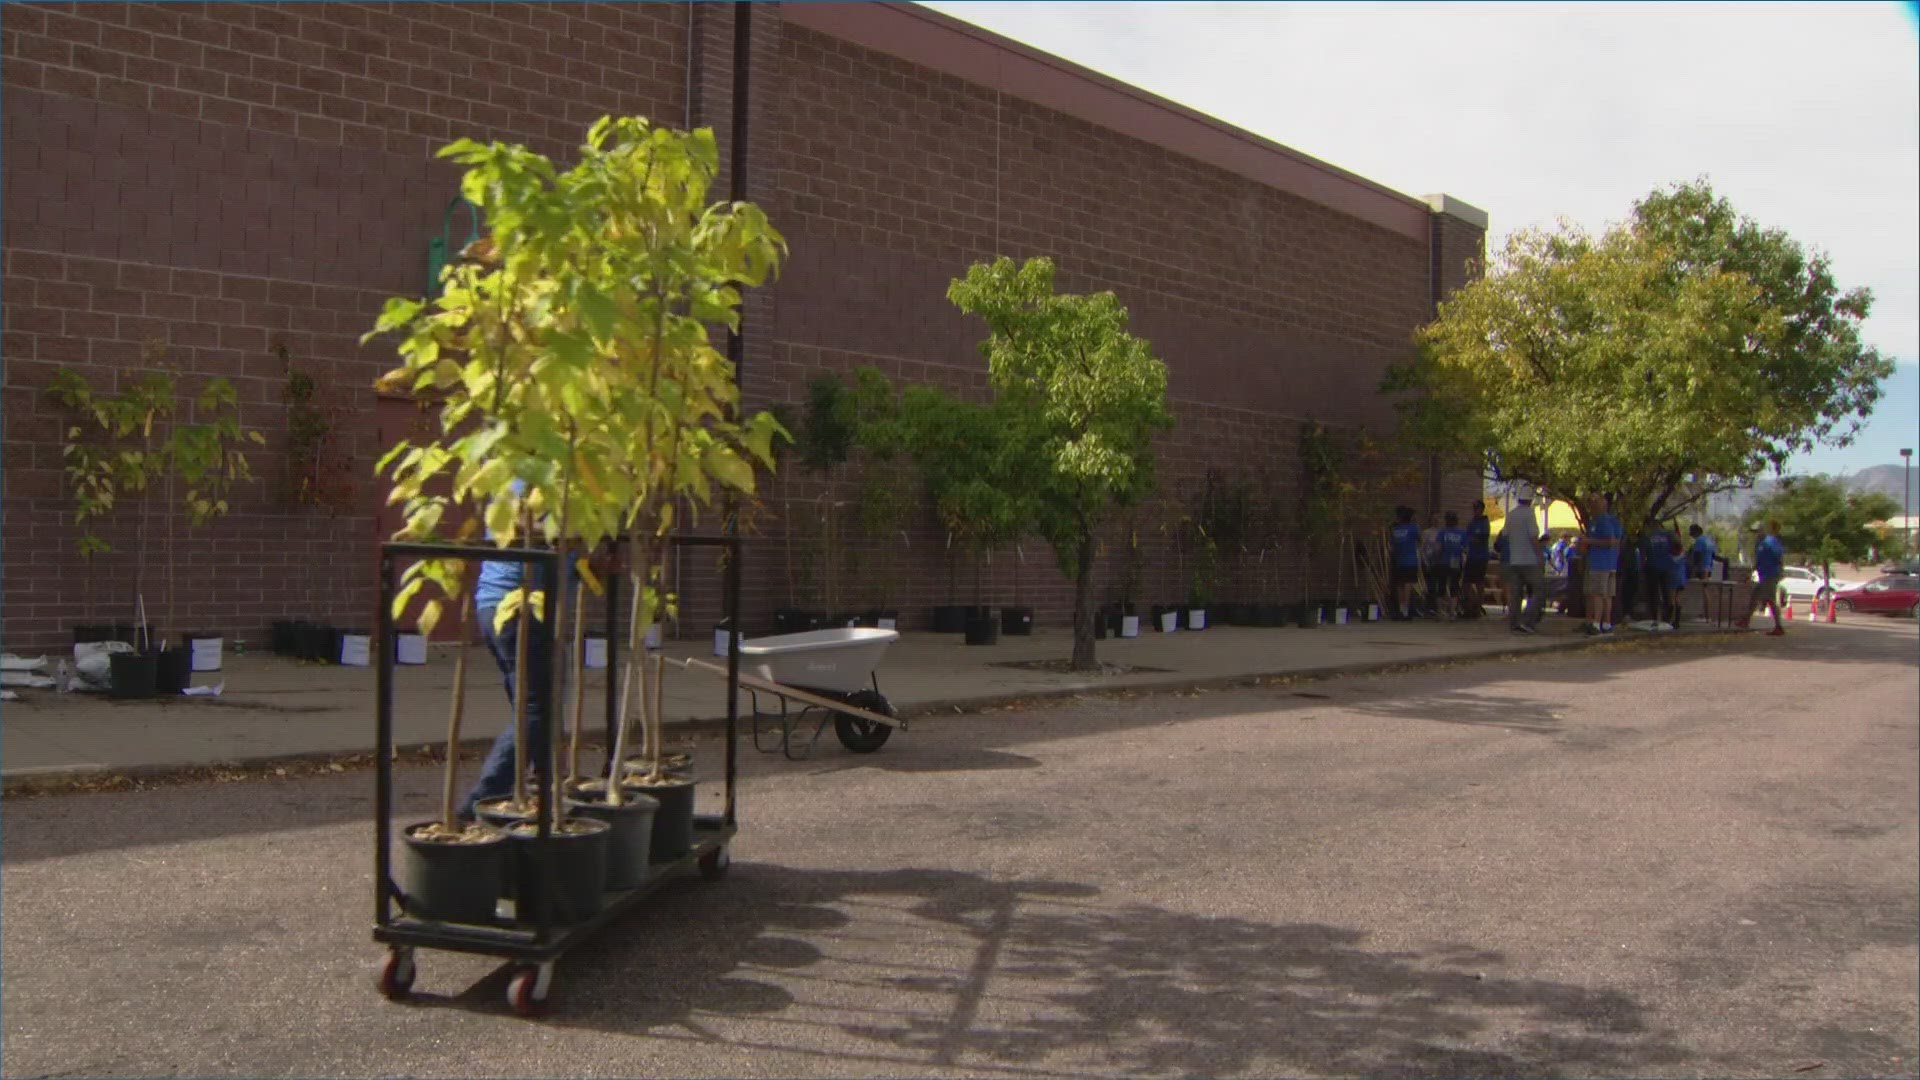 A group of organizations gave out 250 trees to people who lost their homes in the fire.